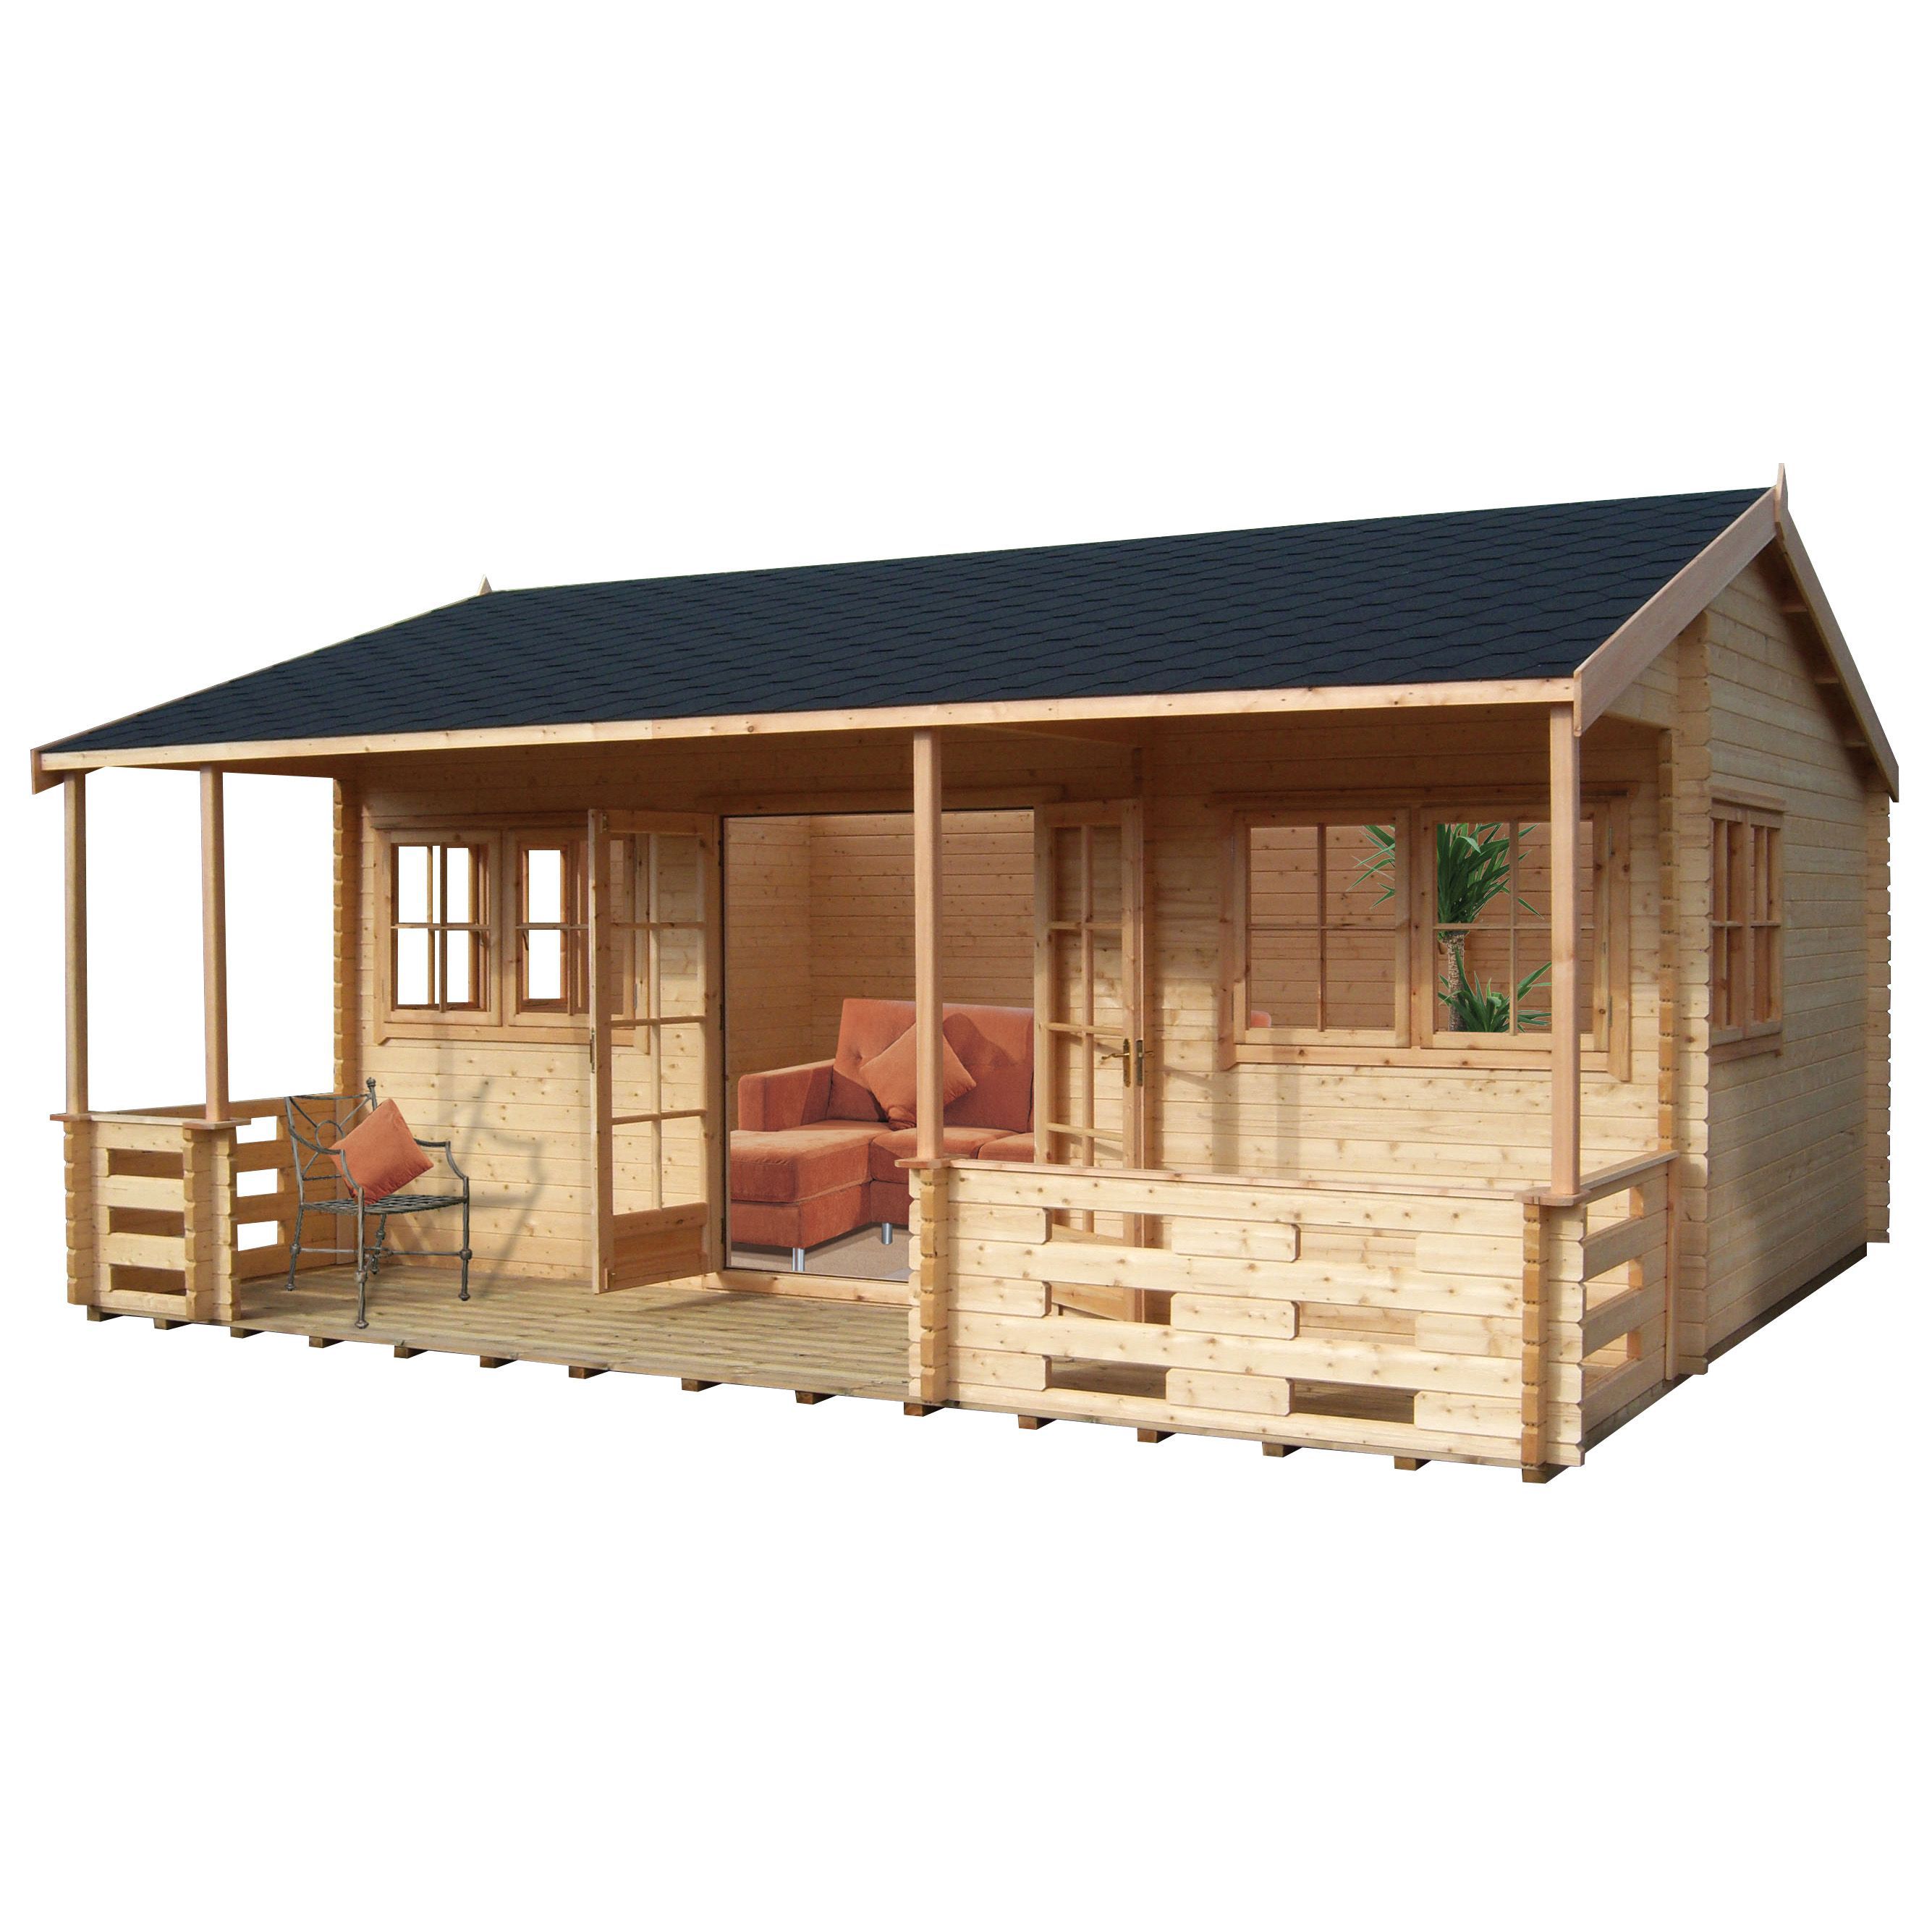 Shire Kingswood 18x20 Apex Tongue & groove Wooden Cabin